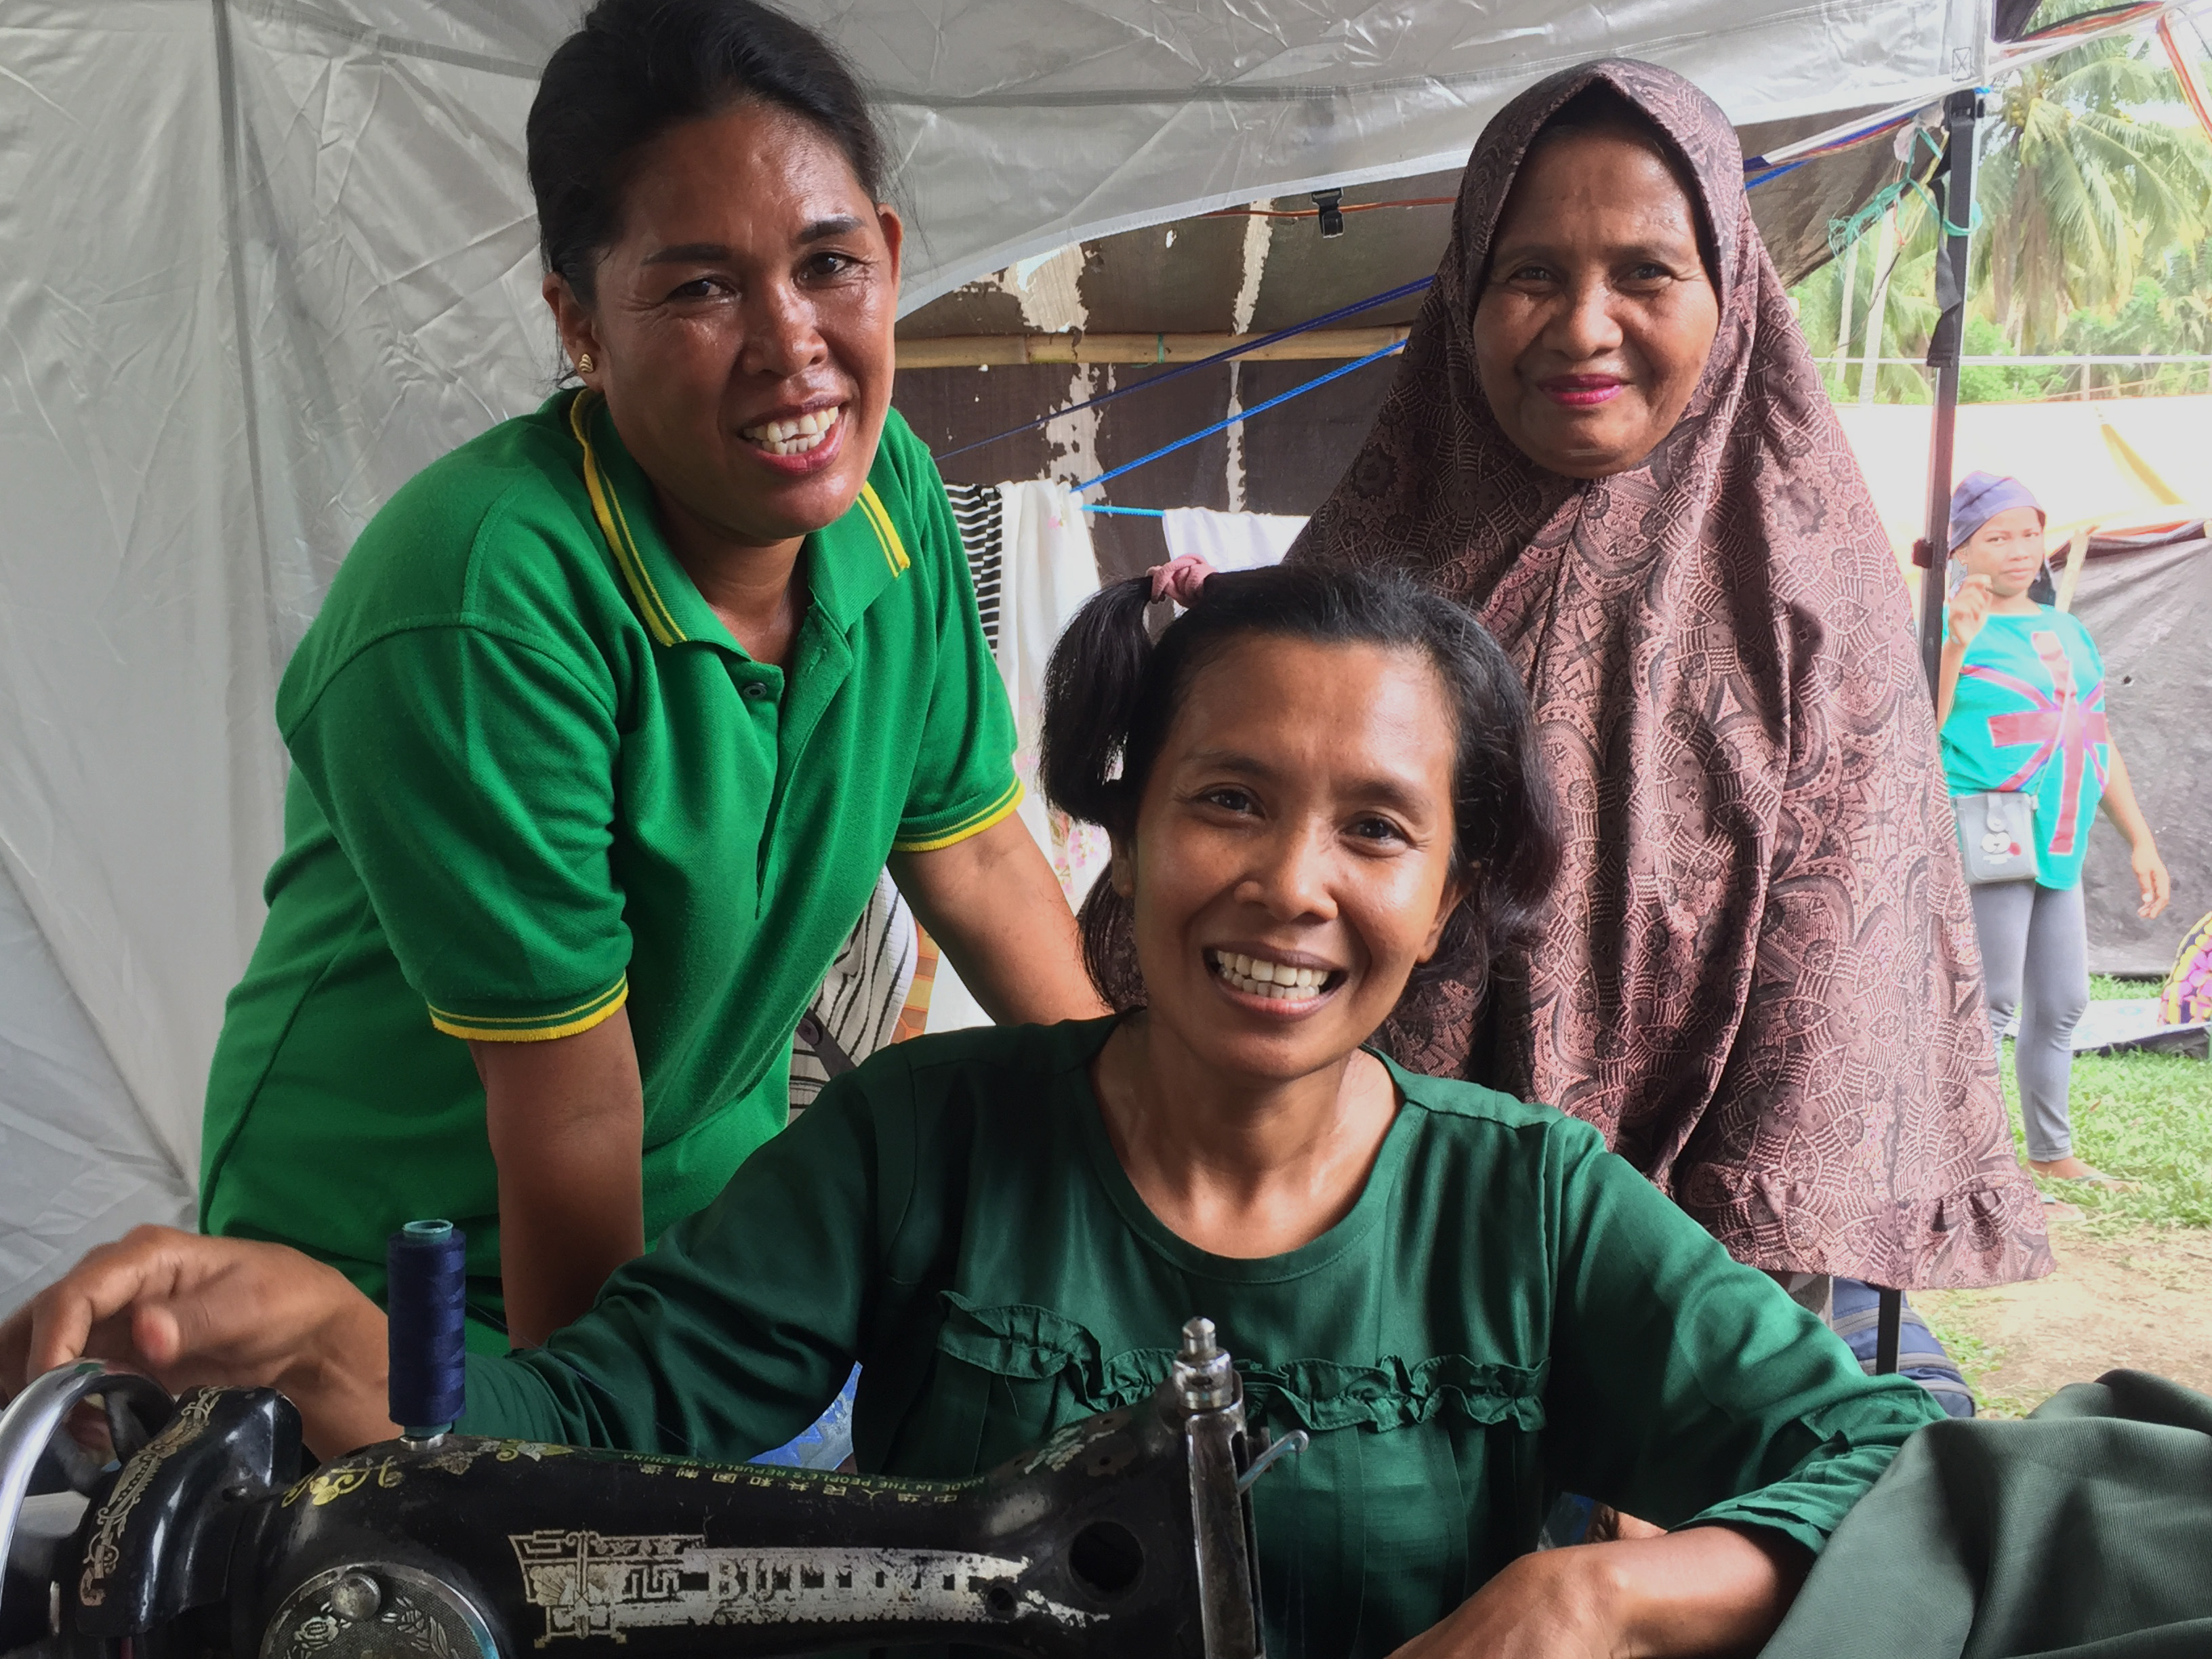 A recipient of ShelterBox aid sews within her tent in Indonesia